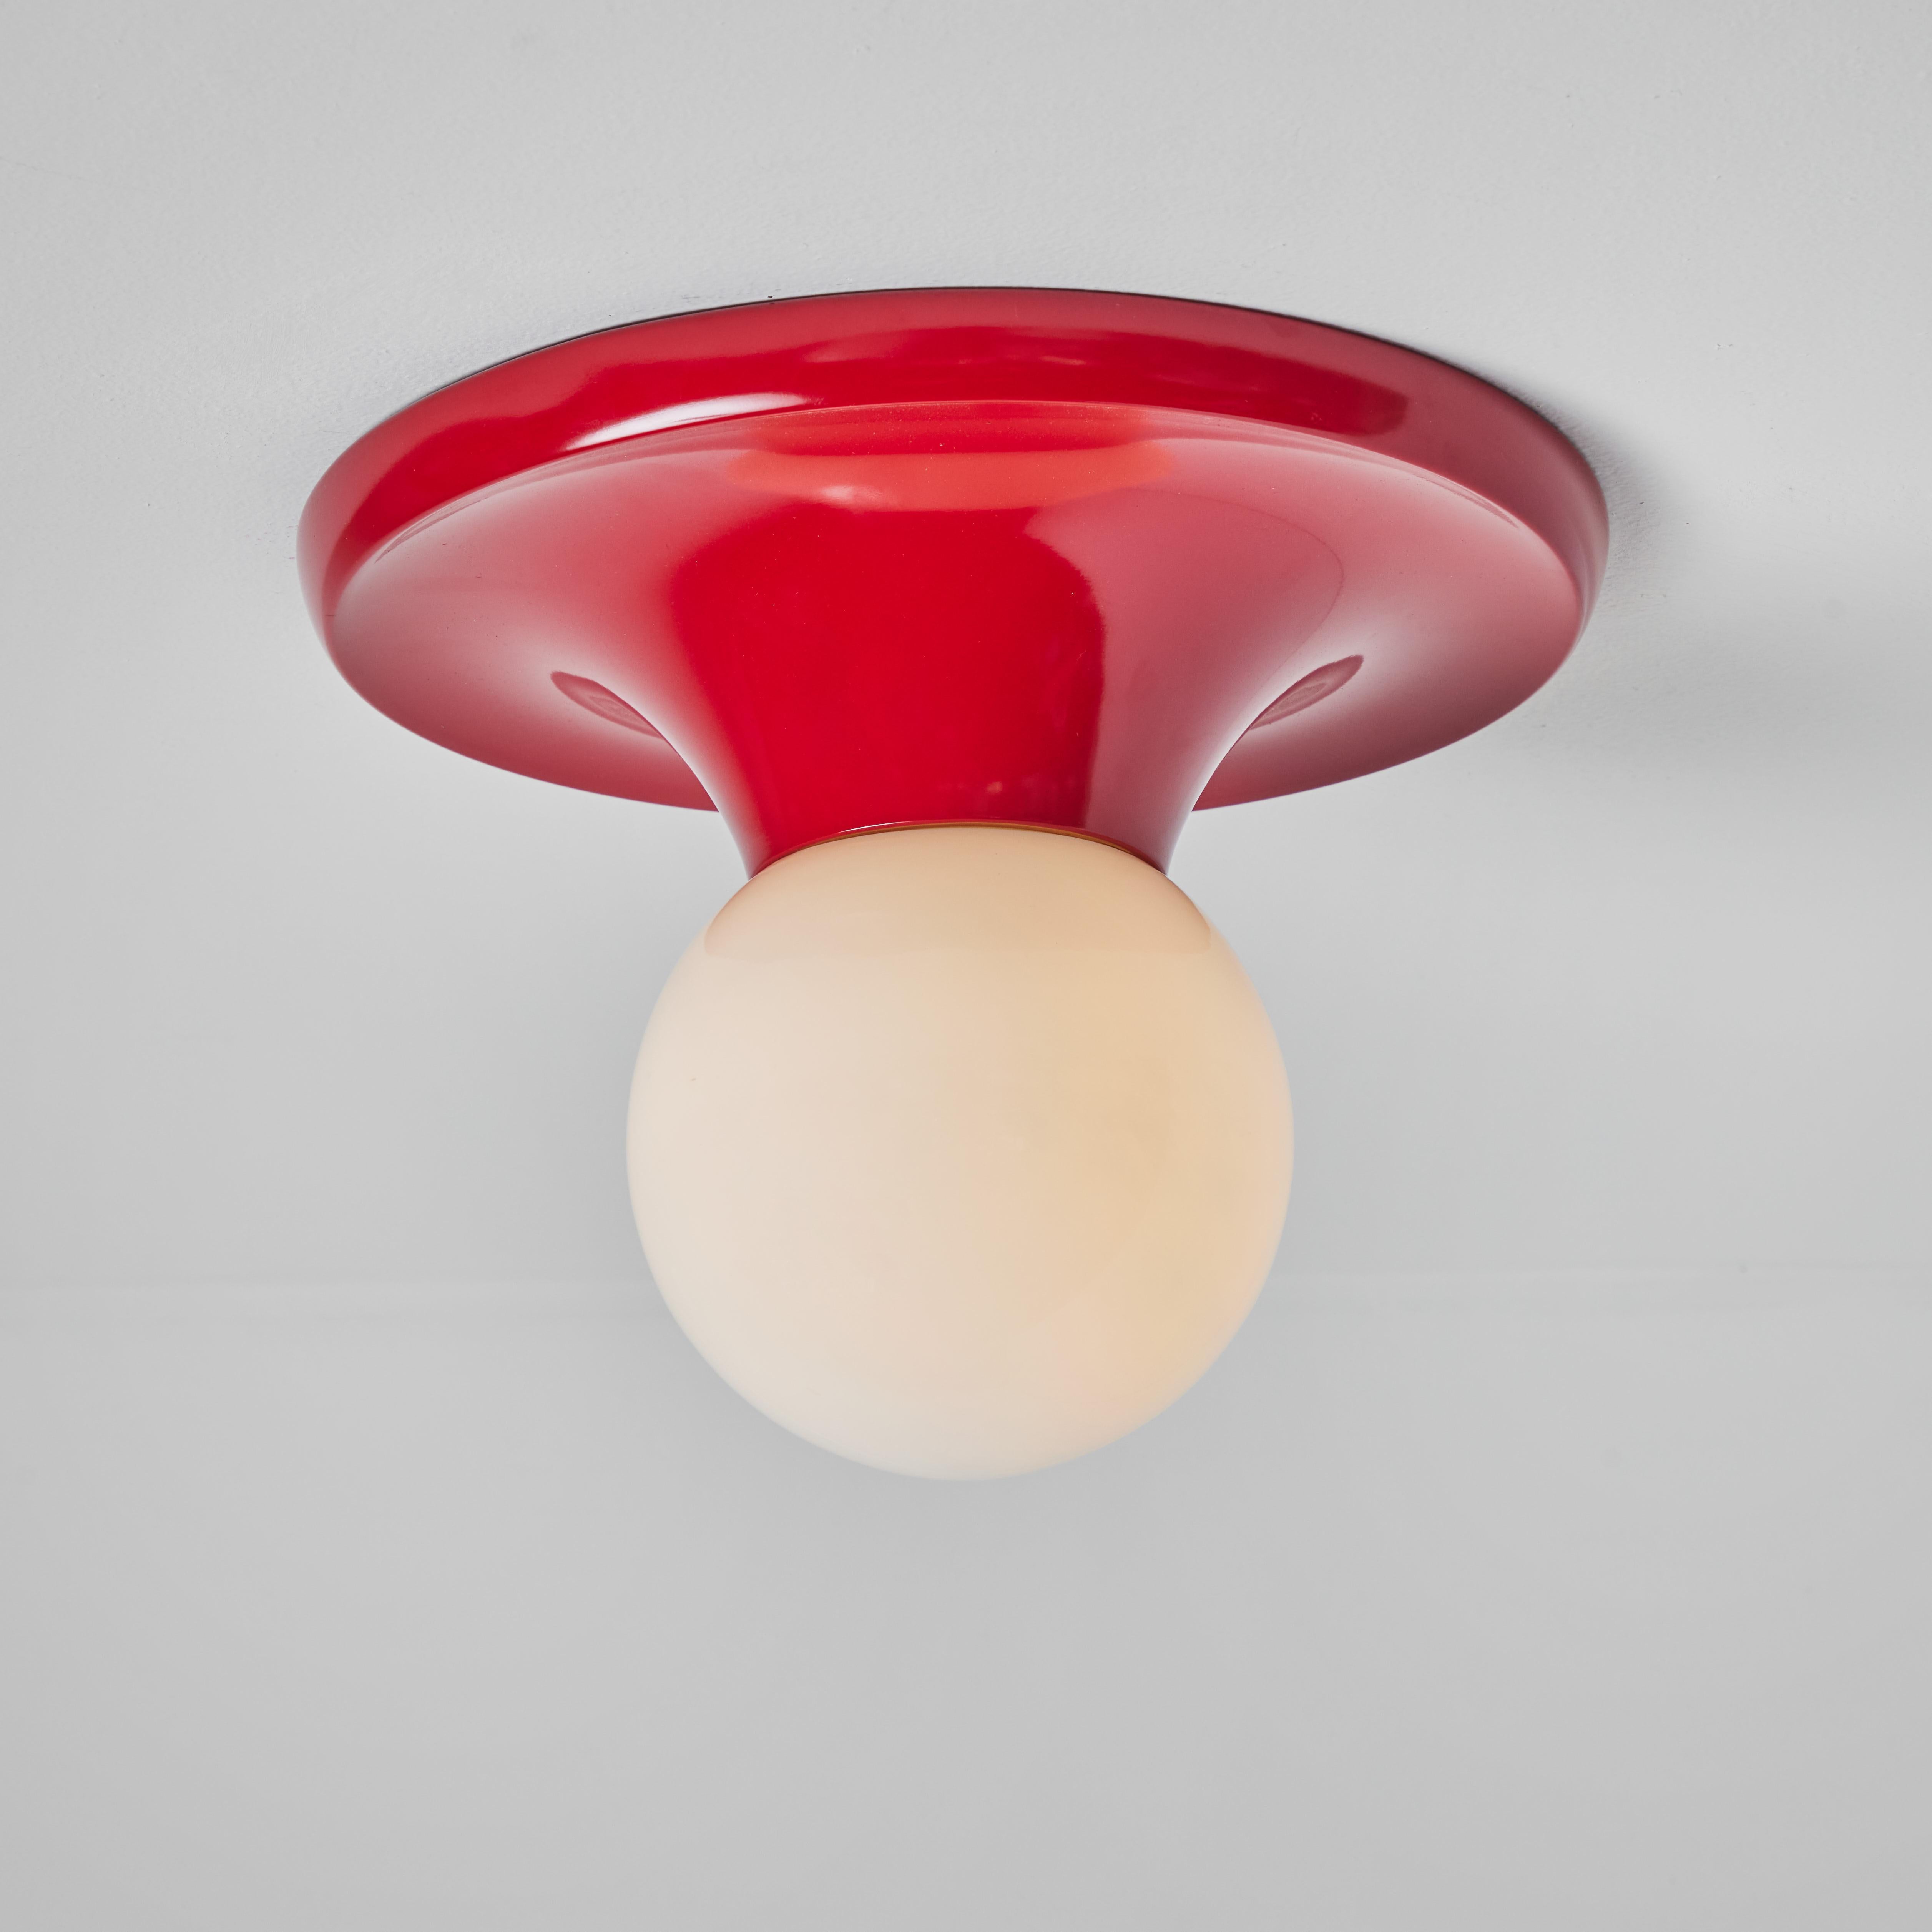 Mid-Century Modern 1960s, Achille Castiglioni 'Light Ball' Wall or Ceiling Lamp in Red for Flos